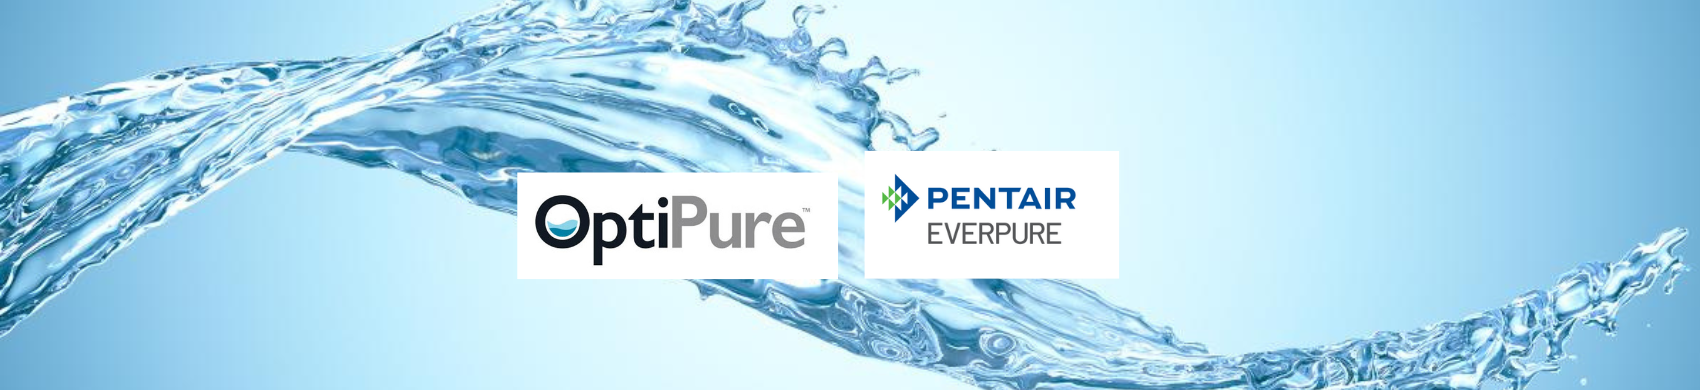 Optipure BWS Reverse Osmosis RO Systems Become Everpure EZ-RO Reverse Osmosis RO Systems - Vita Filters